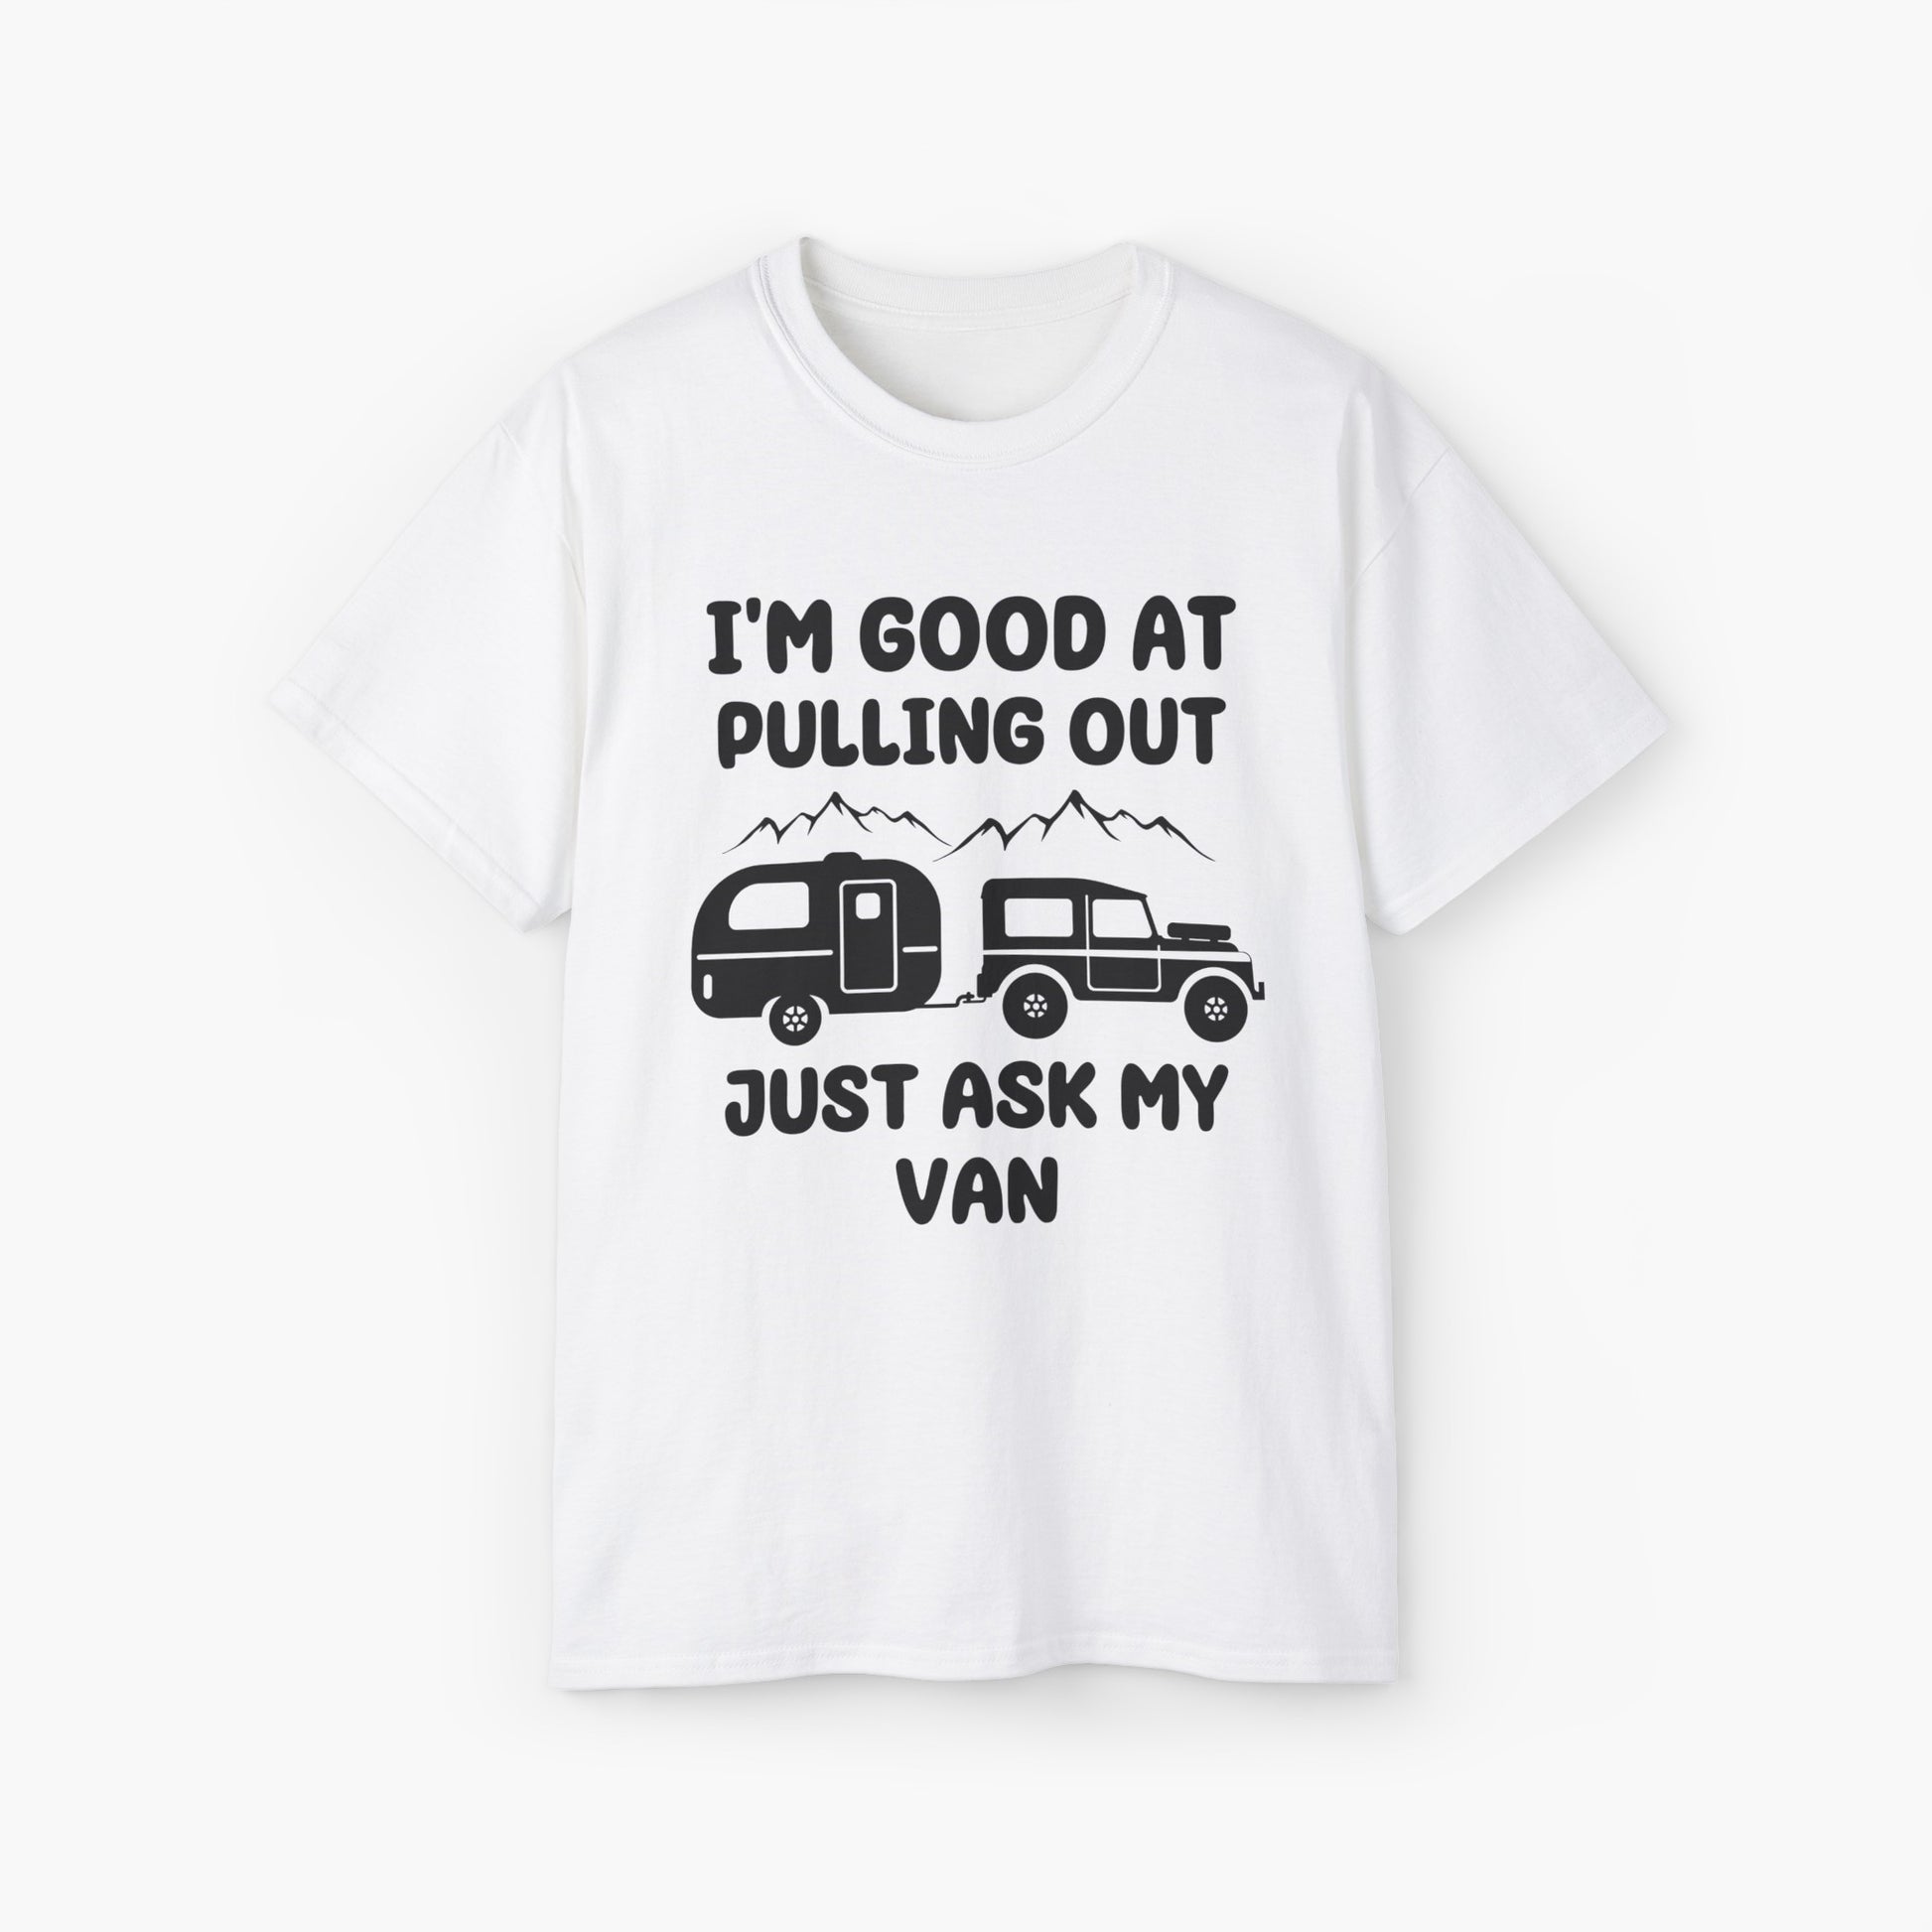 White t-shirt with humorous text 'I'm good at pulling out, just ask my van,' featuring an image of a truck pulling a camping van, set against mountains on a plain background.